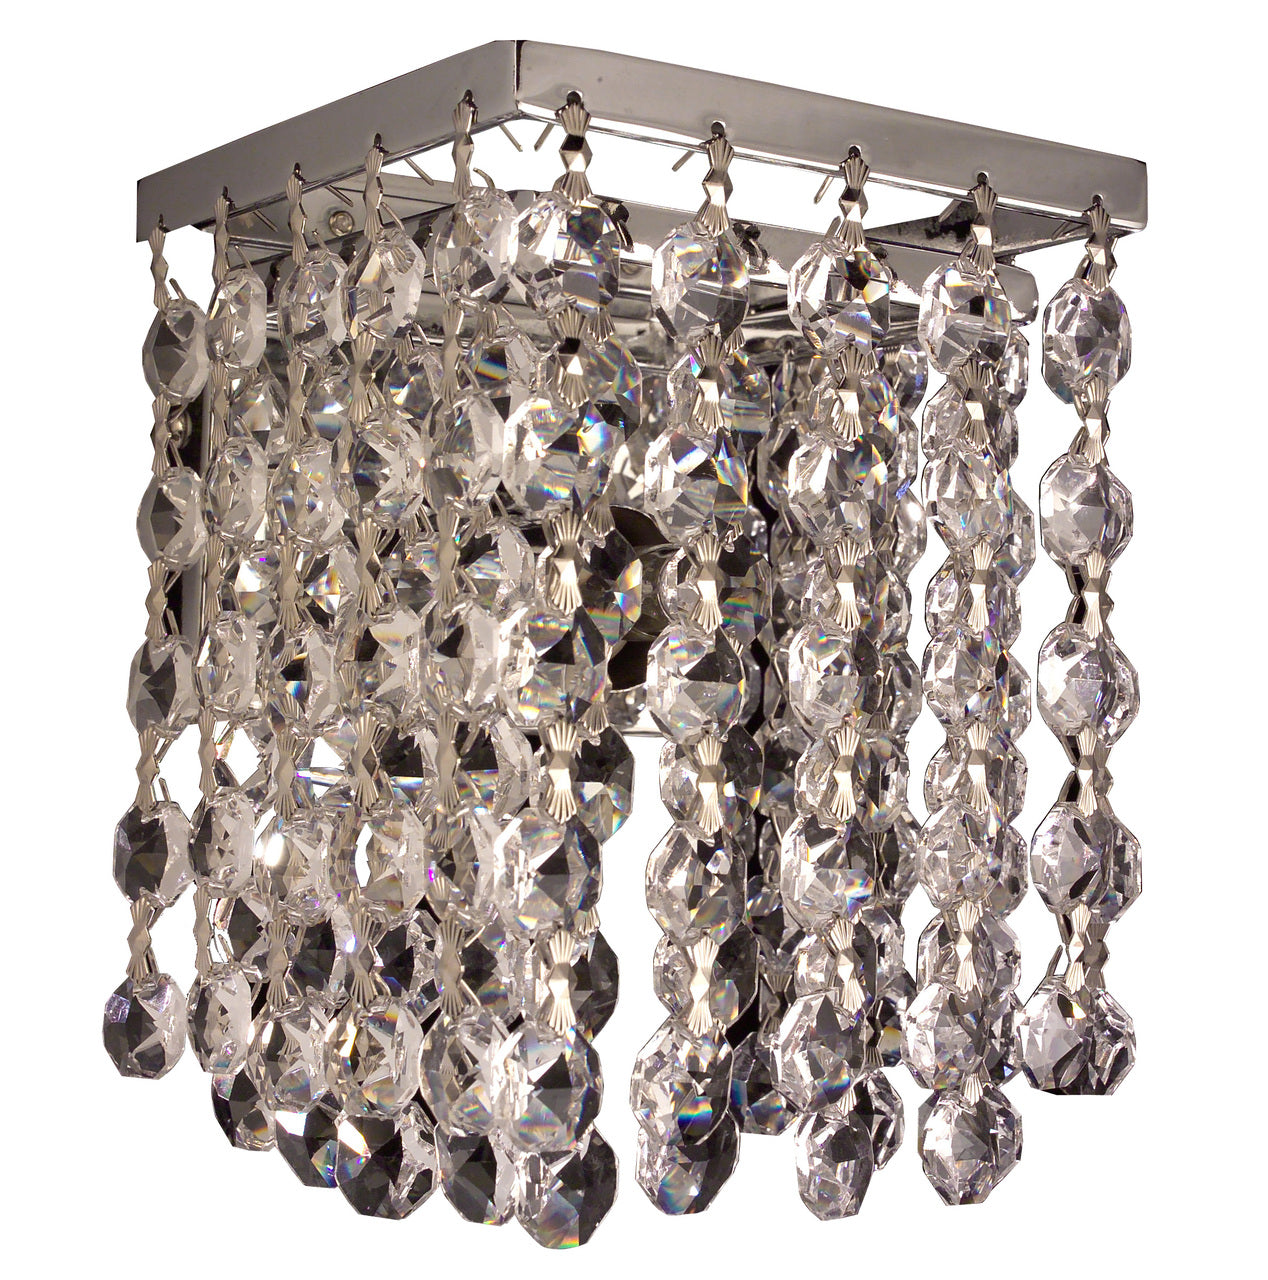 Classic Lighting 16102 BLK Bedazzle Crystal Wall Sconce in Chrome